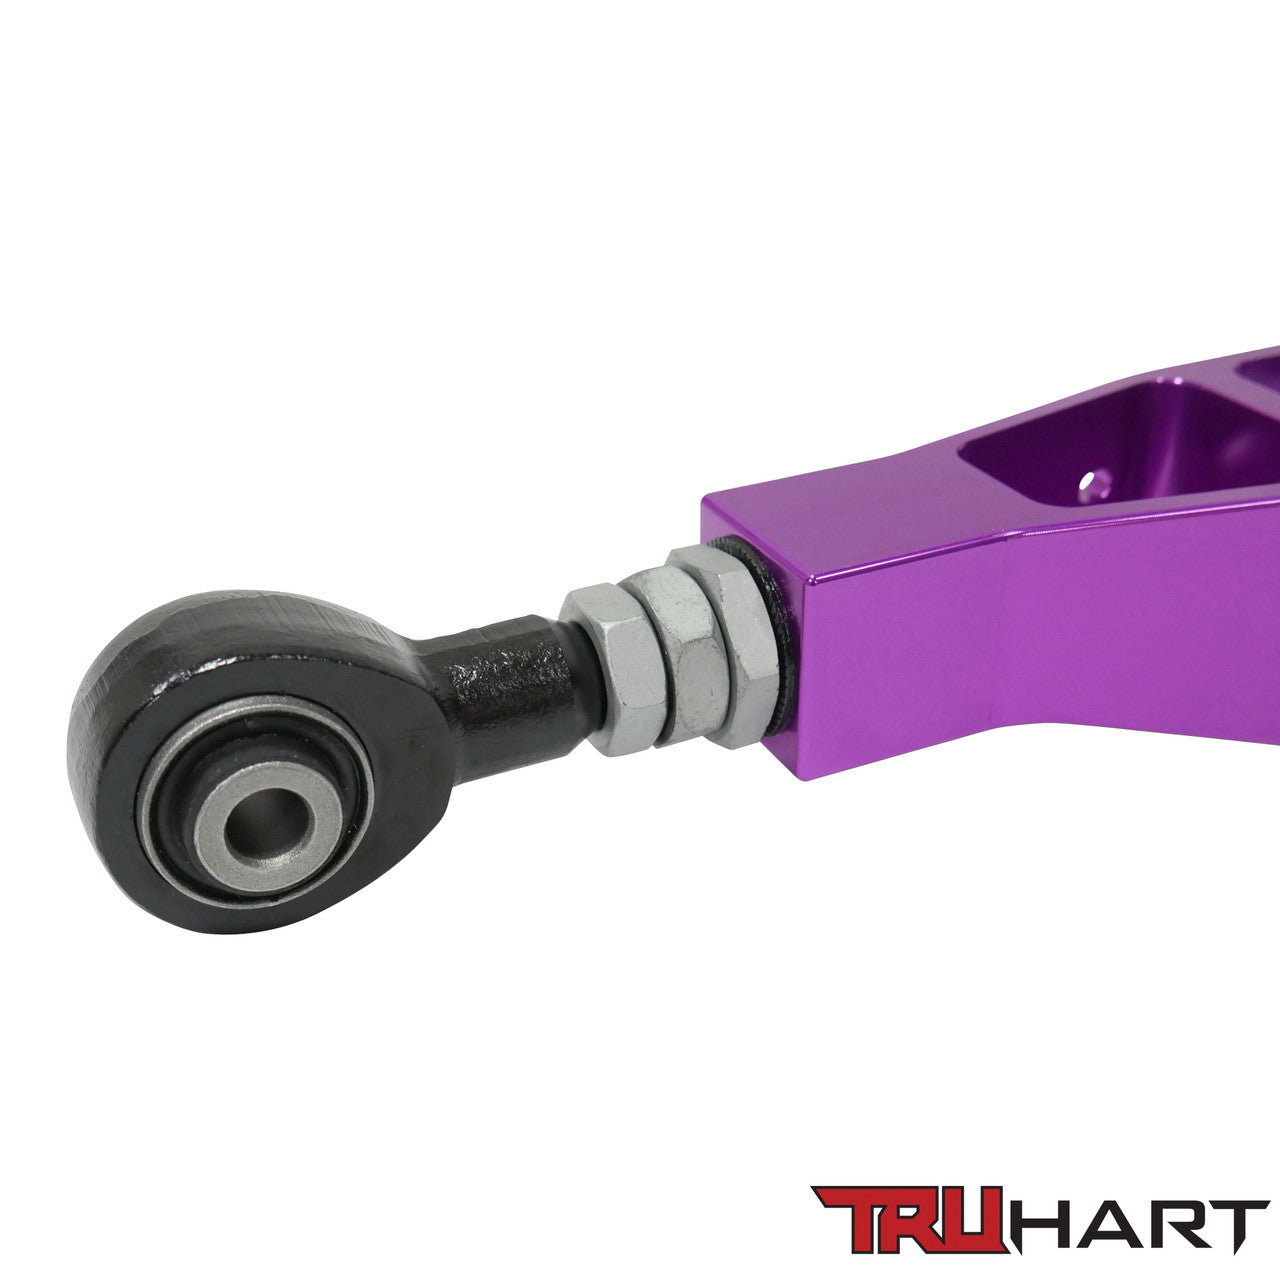 TruHart Adjustable Rear Lower Control Arms Kit For Subaru BRZ 2012+ FRS (Purple)